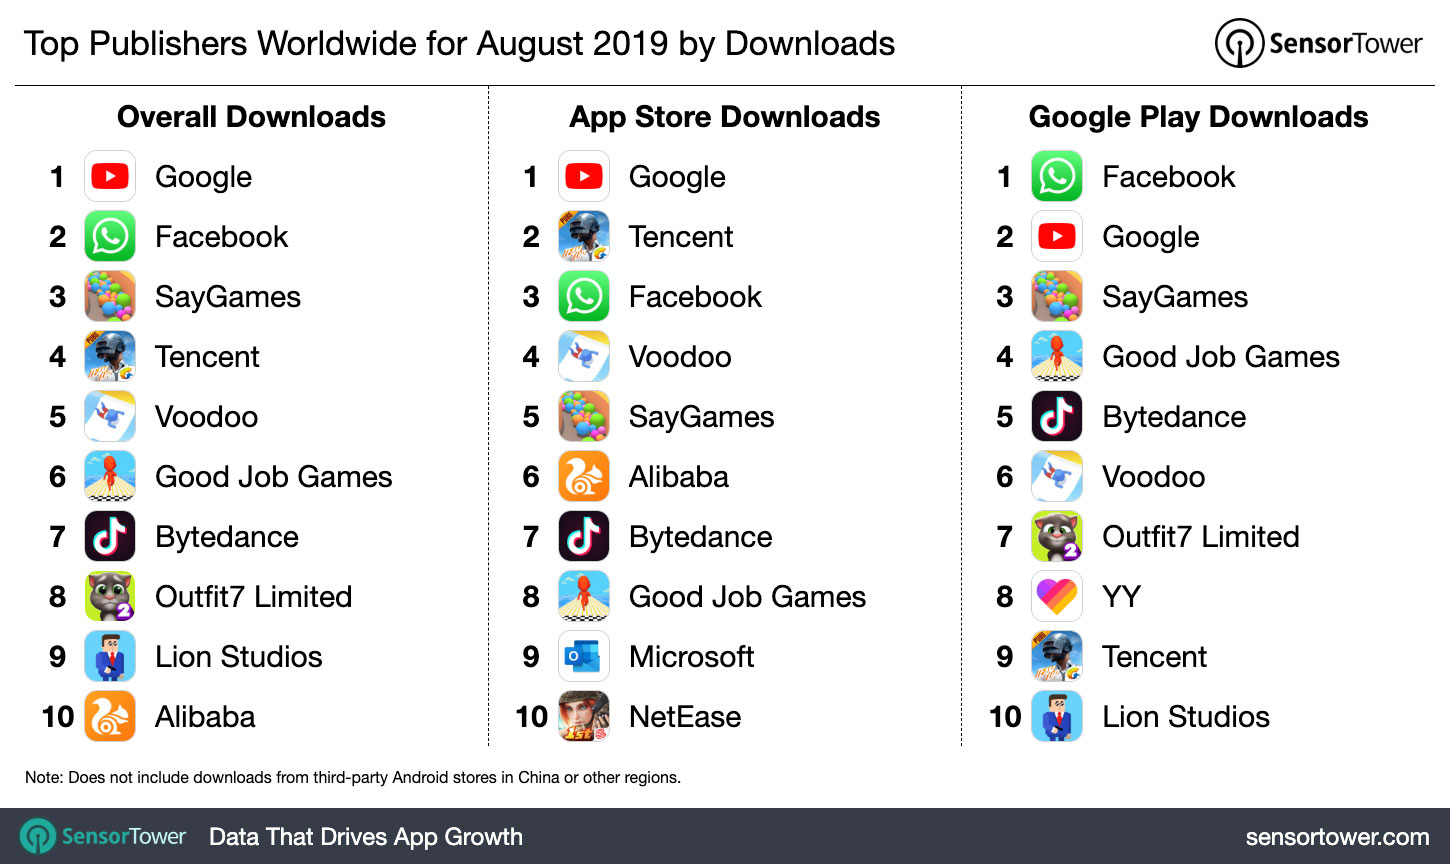 Top Publishers Worldwide for August 2019 by Downloads